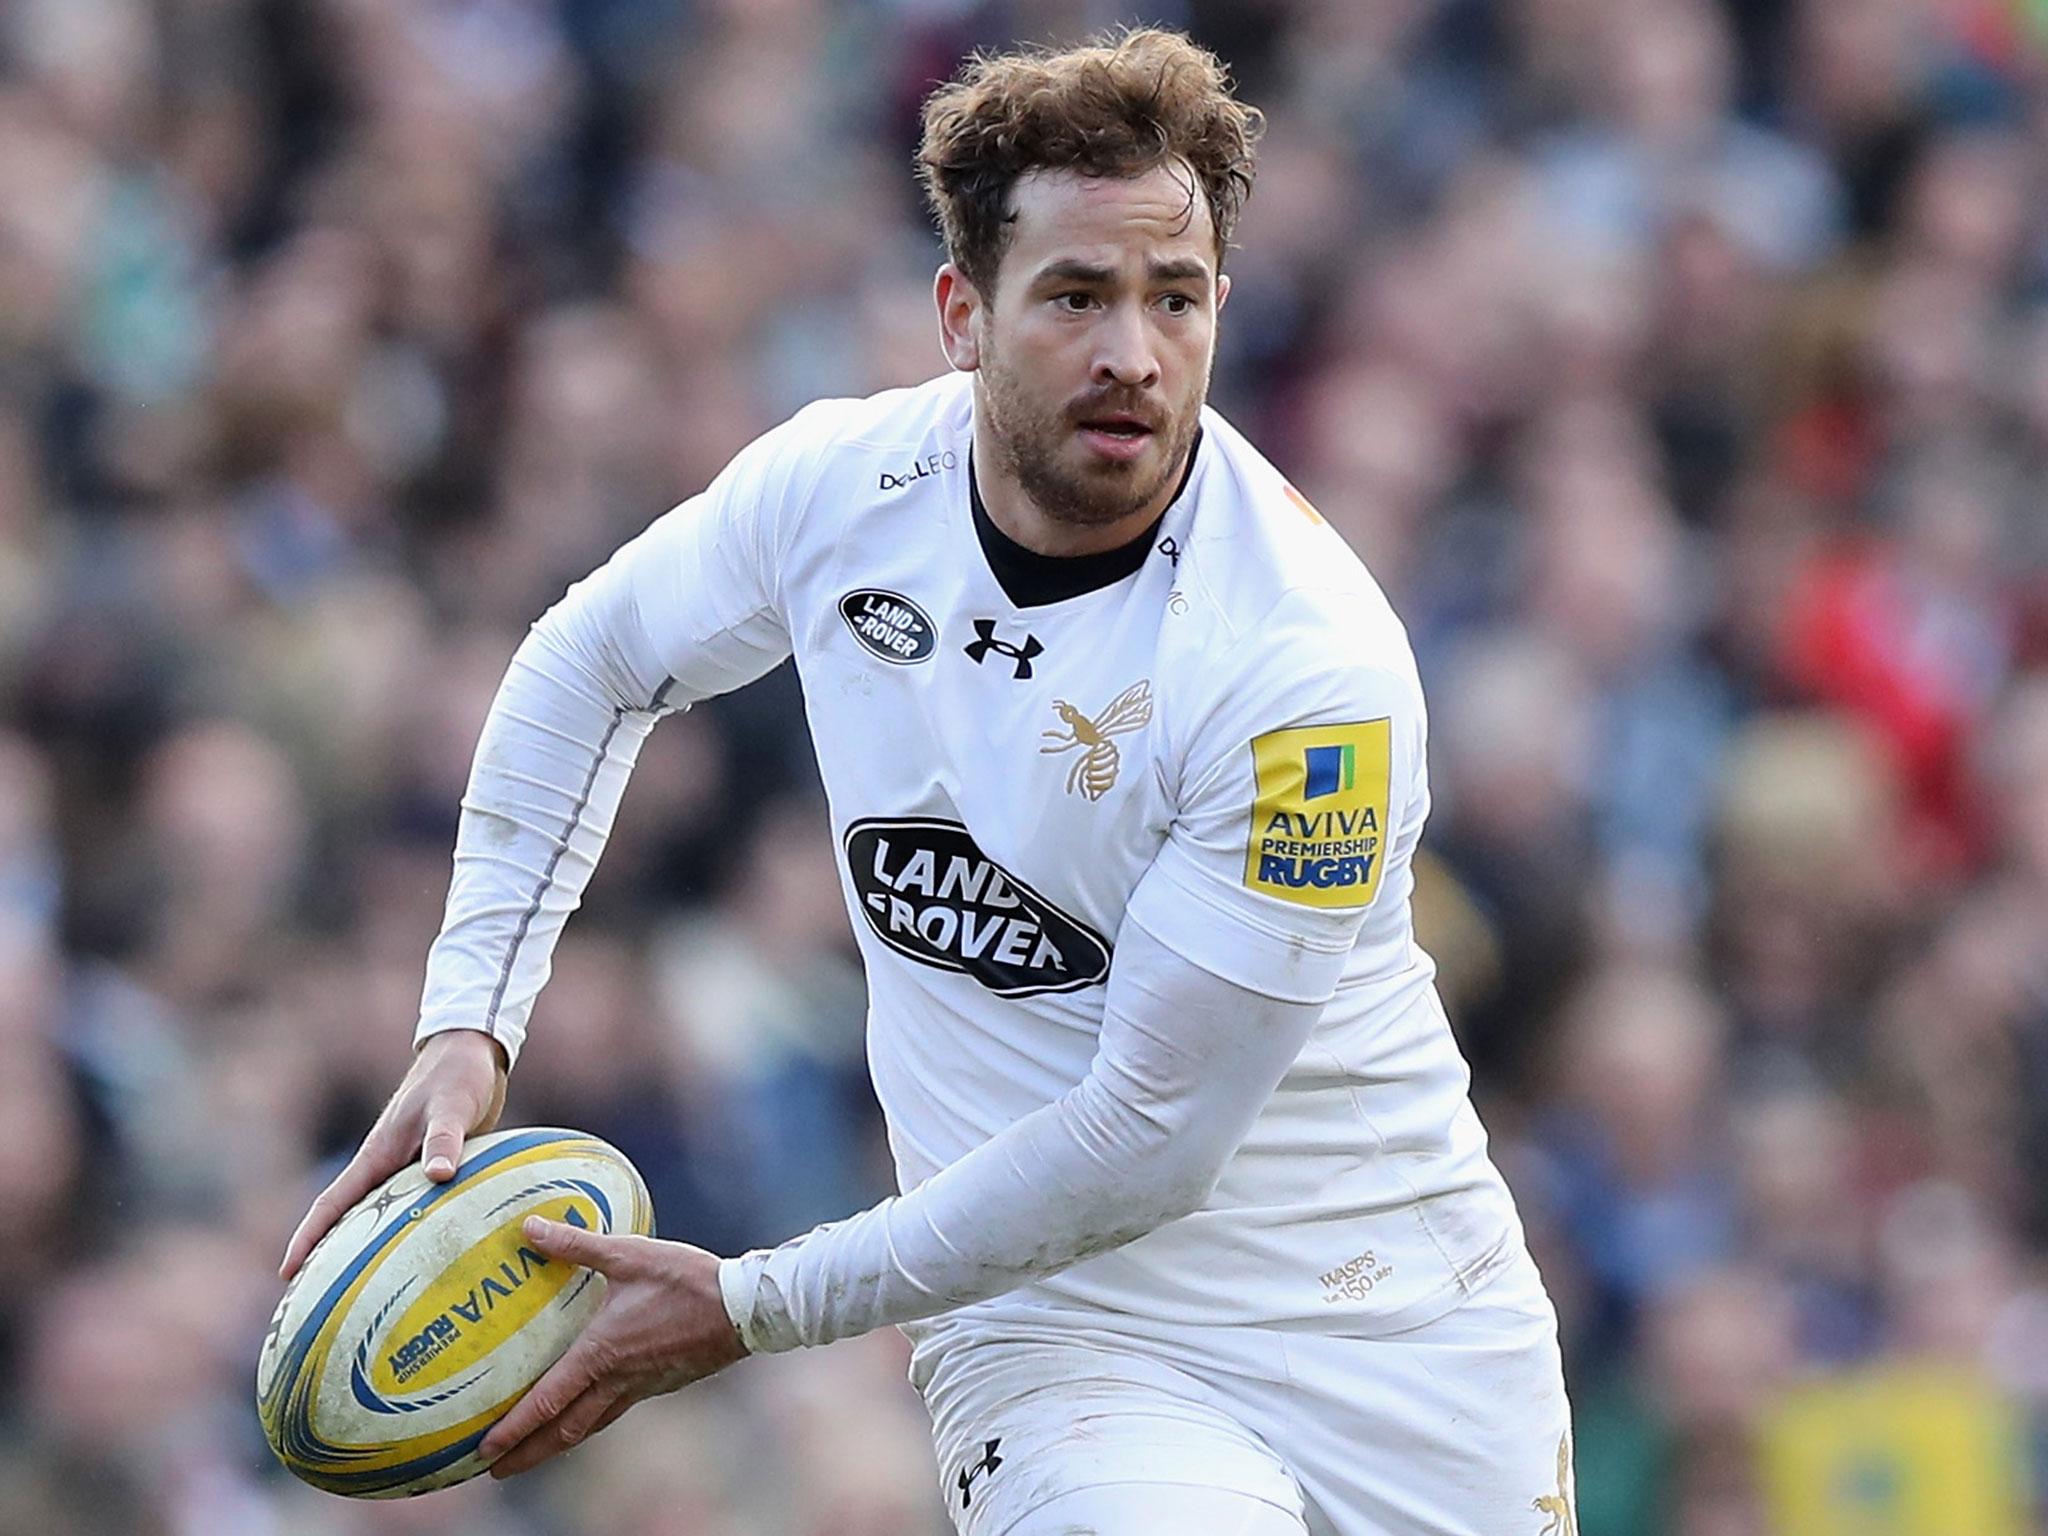 Ciprani is delighted at being offered another chance to play for England